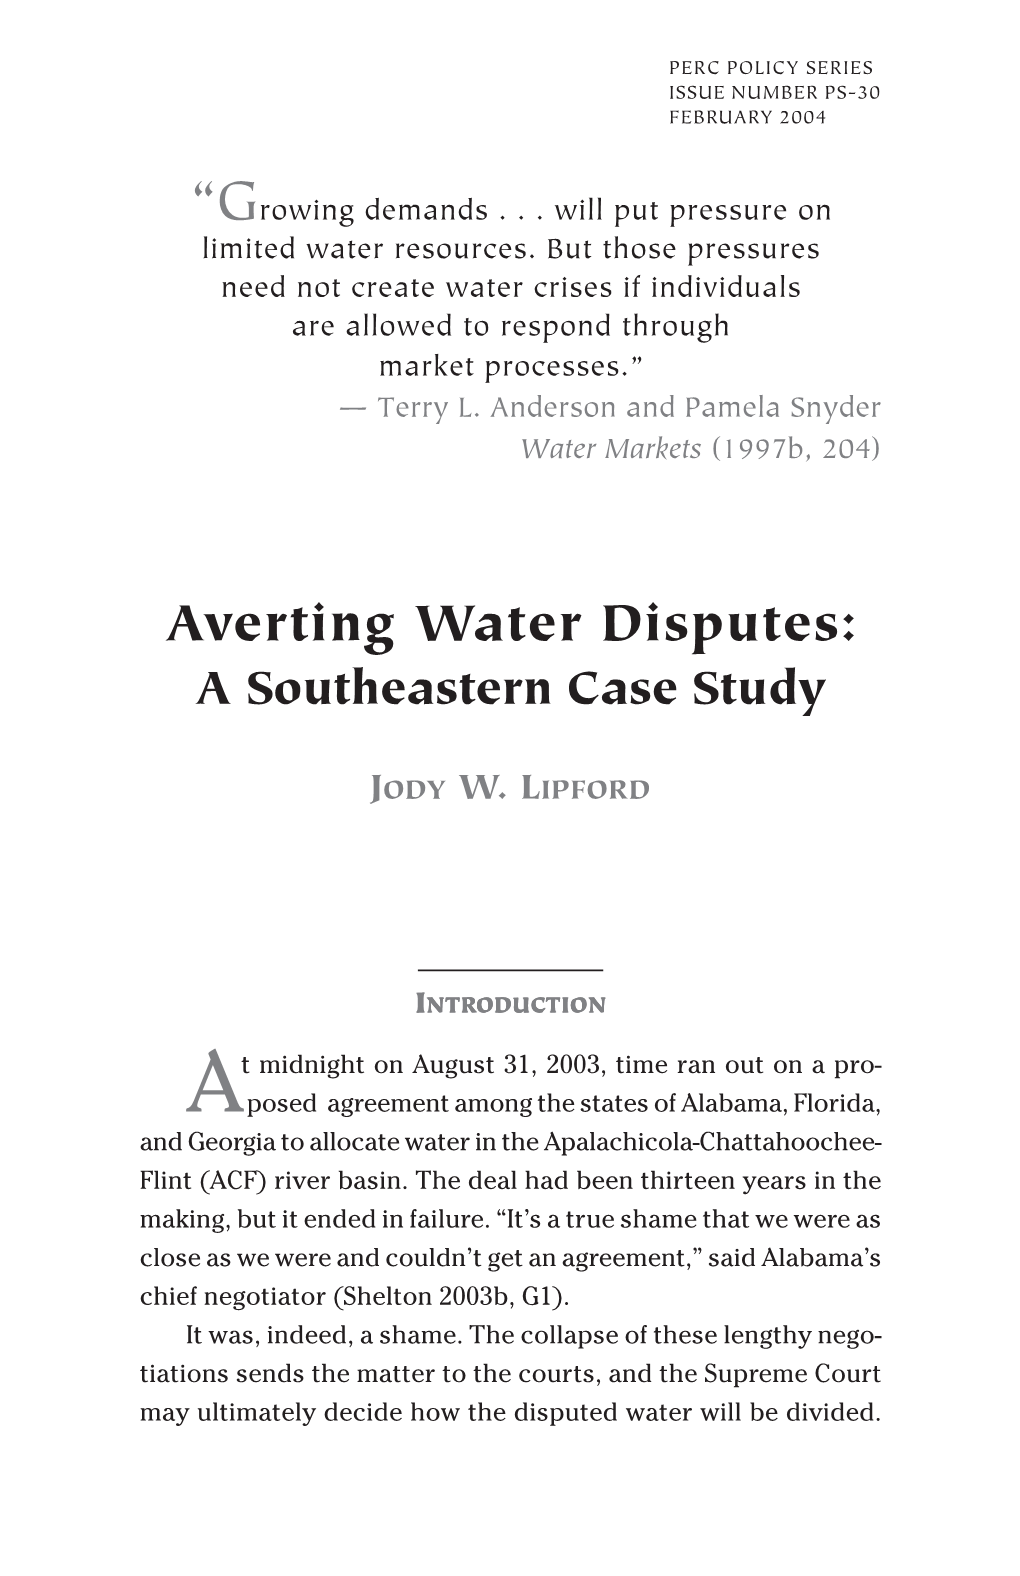 Averting Water Disputes: a Southeastern Case Study